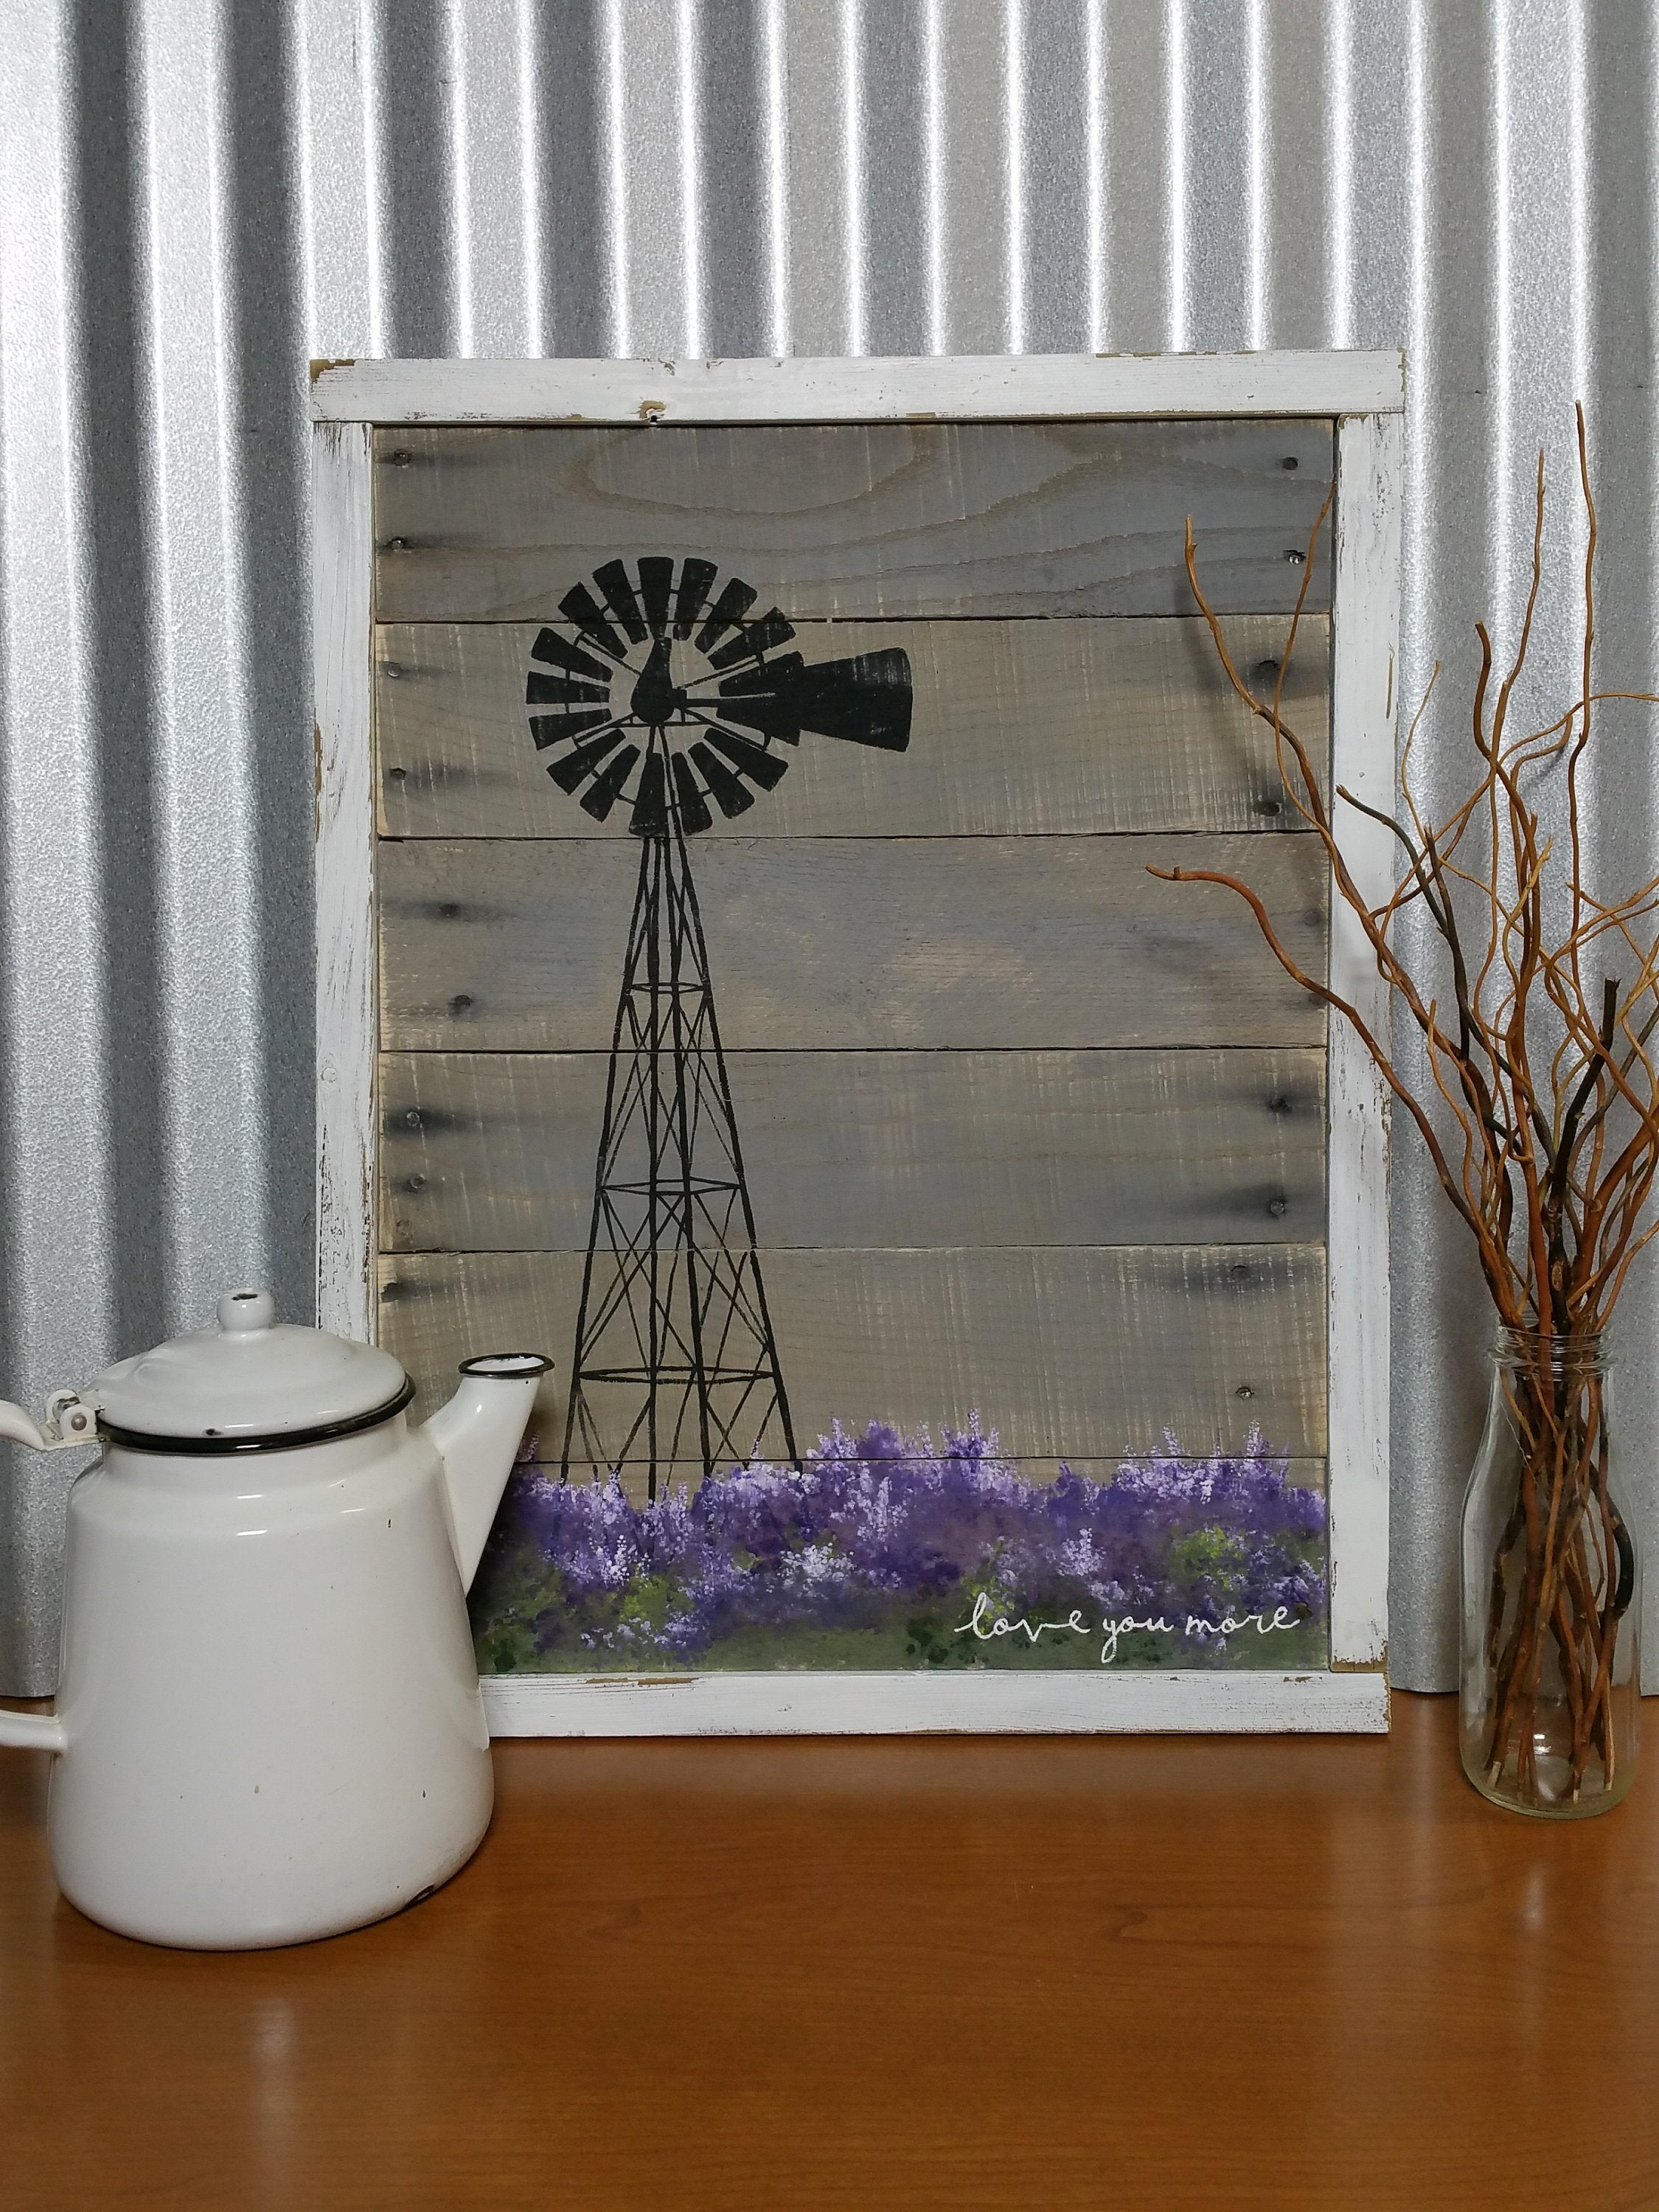 Windmill in field of lavender, hand painted pallet art, word sign with "Love you more", Farmhouse decor